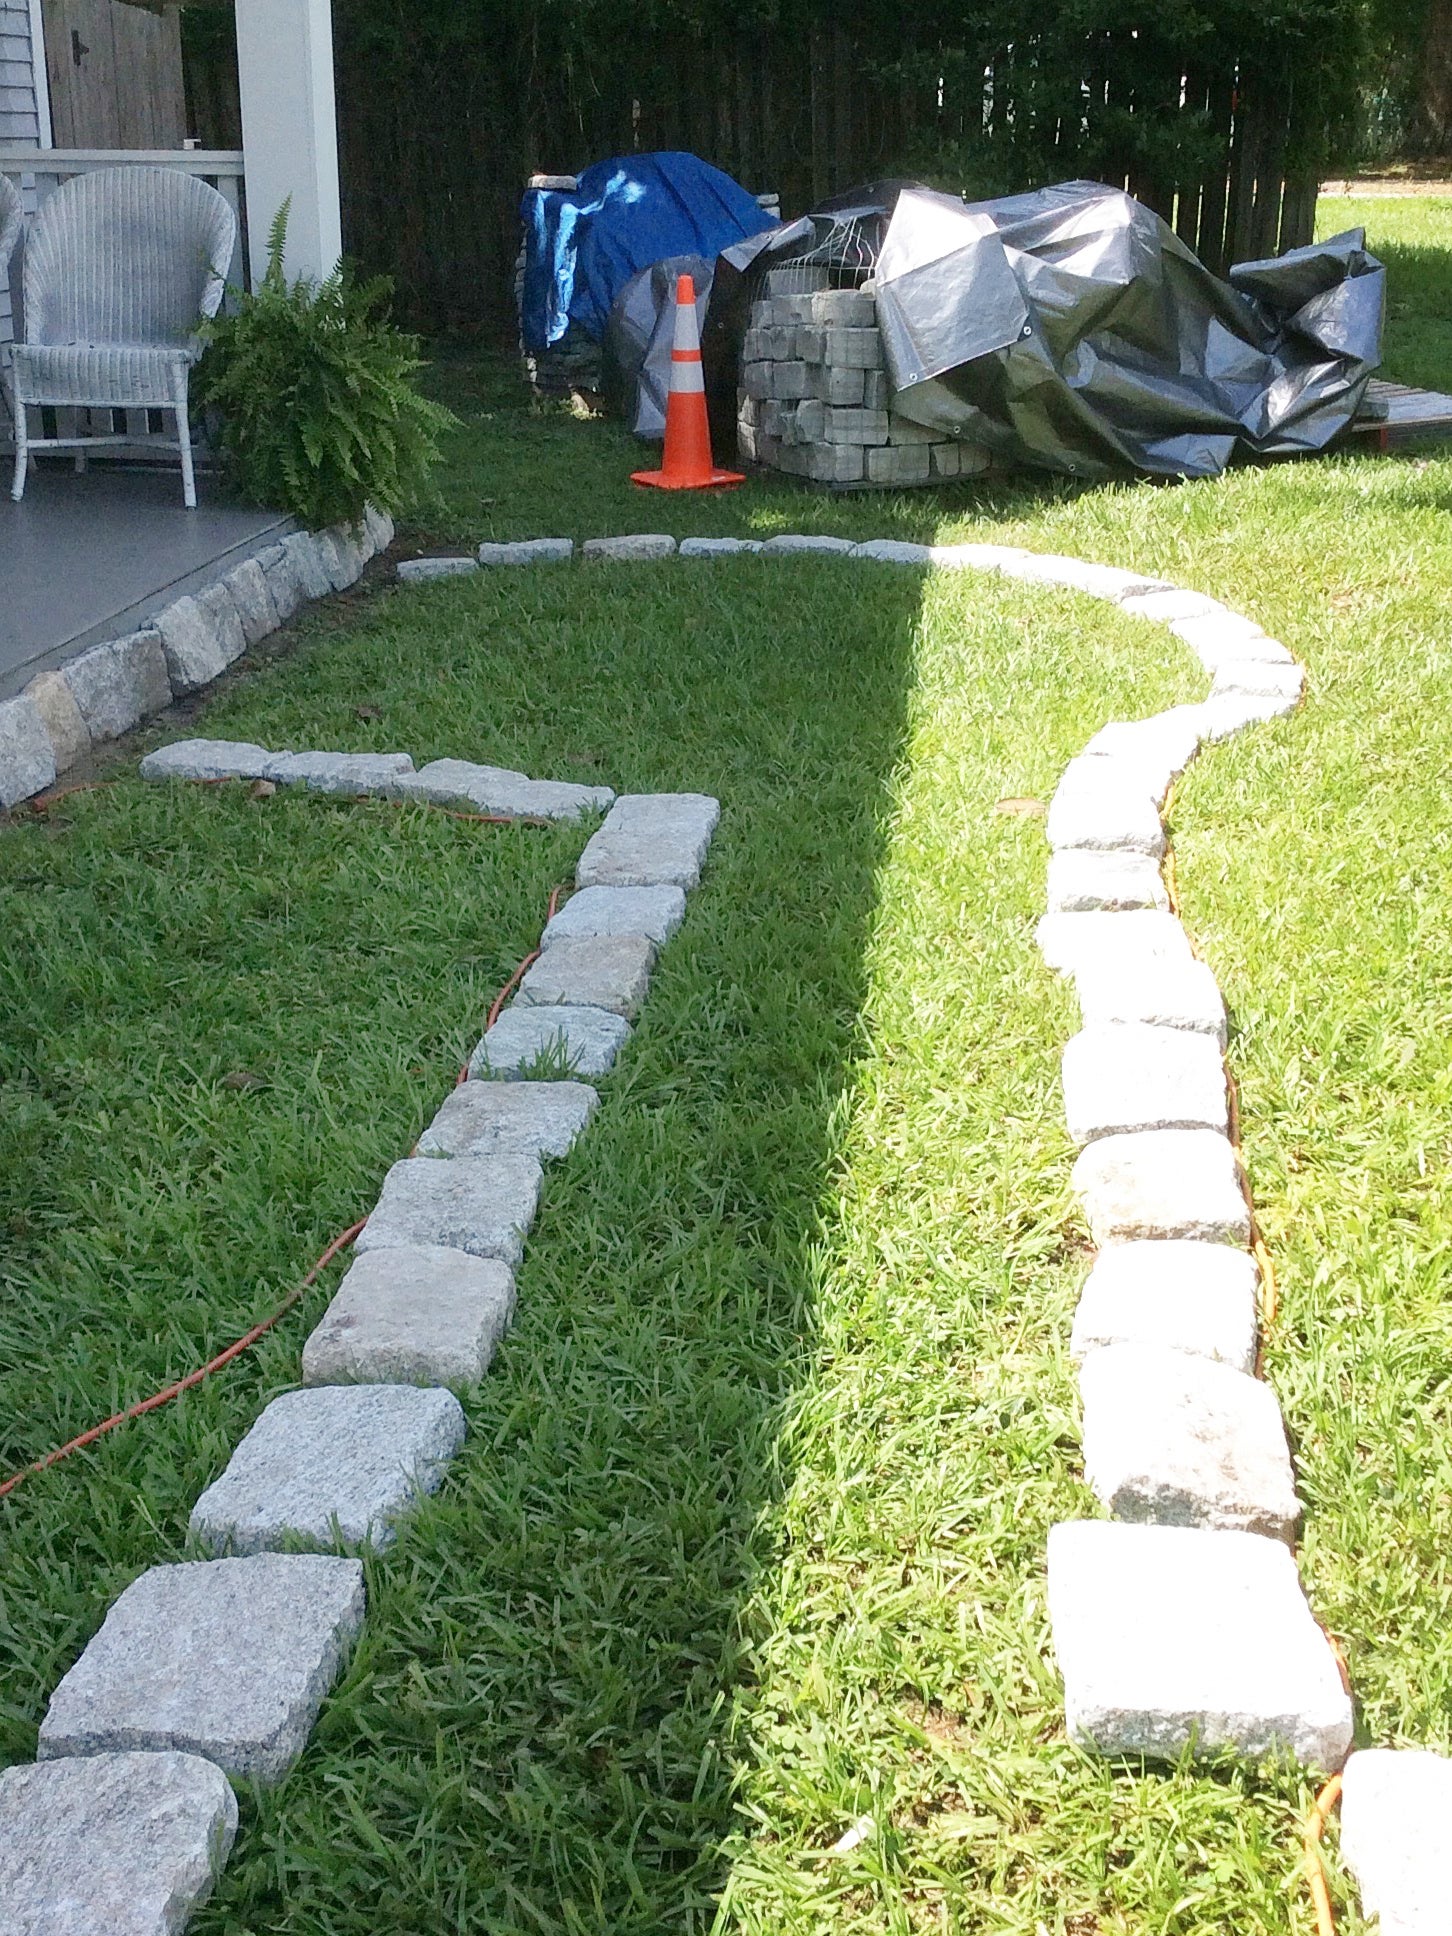 paving stones put in the grass